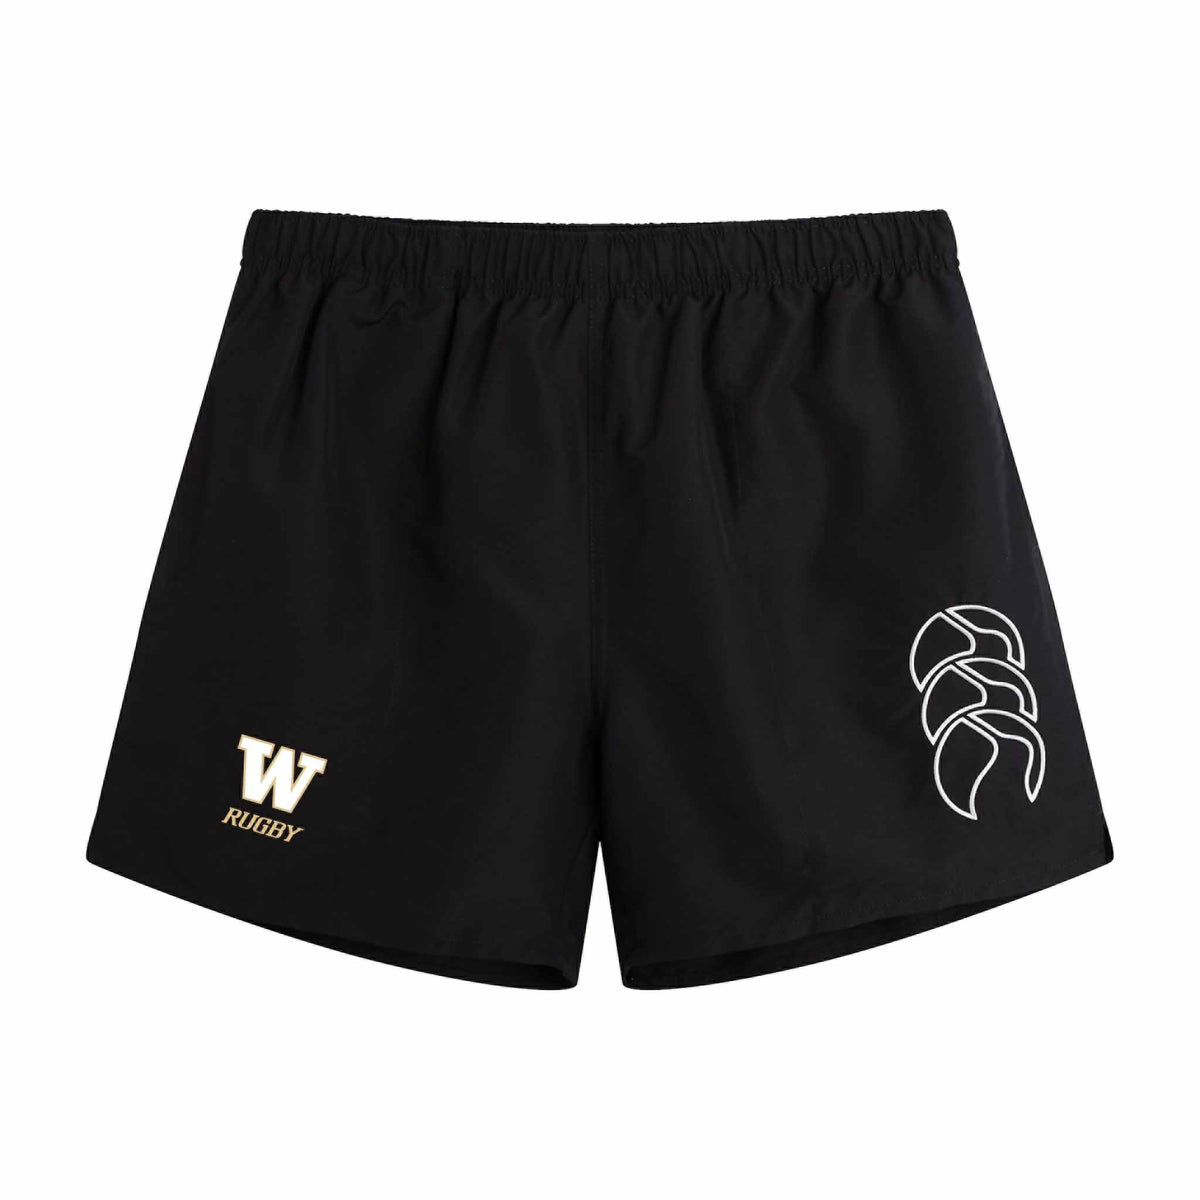 UW Women&#39;s Huskies Rugby Club Canterbury Tactic Shorts - Adult Unisex - Black - The Rugby Shop The Rugby Shop UNISEX / BLACK / XS TRS Distribution Canada SHORTS UW Women&#39;s Huskies Rugby Club Canterbury Tactic Shorts - Adult Unisex - Black